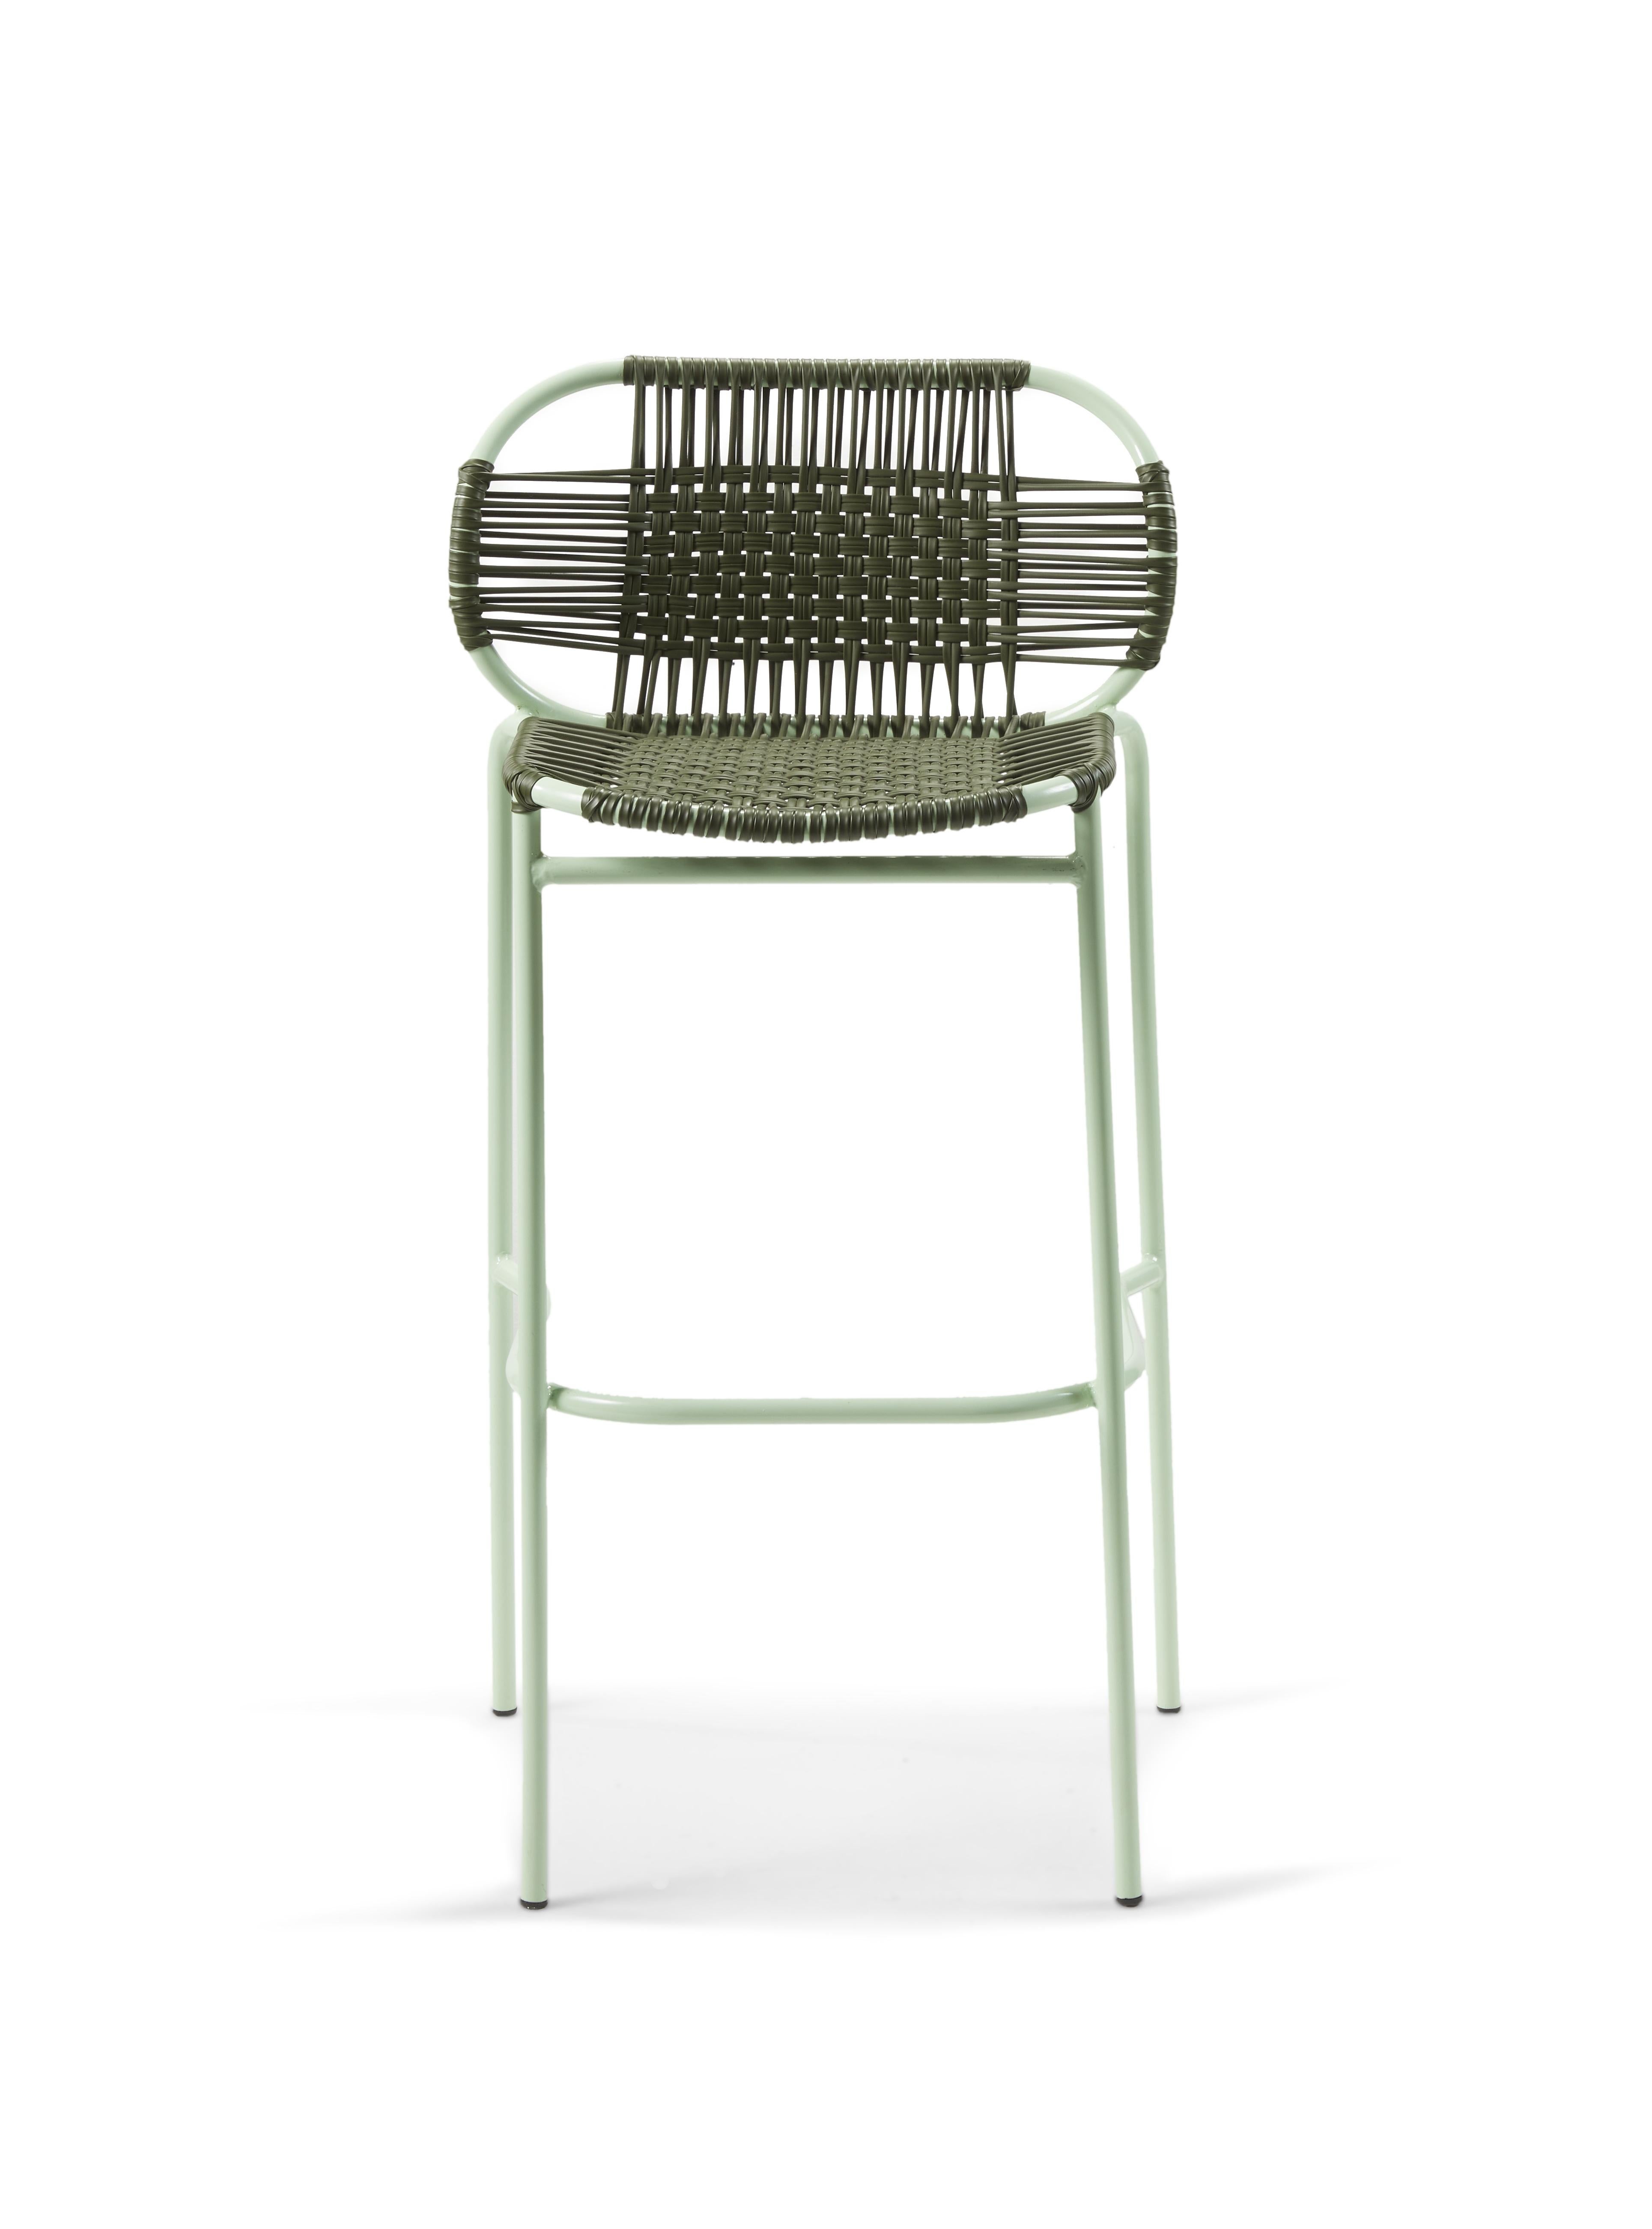 Set of 4 Olive Cielo bar stool by Sebastian Herkner.
Materials: Galvanized and powder-coated tubular steel. PVC strings are made from recycled plastic.
Technique: Made from recycled plastic and weaved by local craftspeople in Cartagena, Colombia.